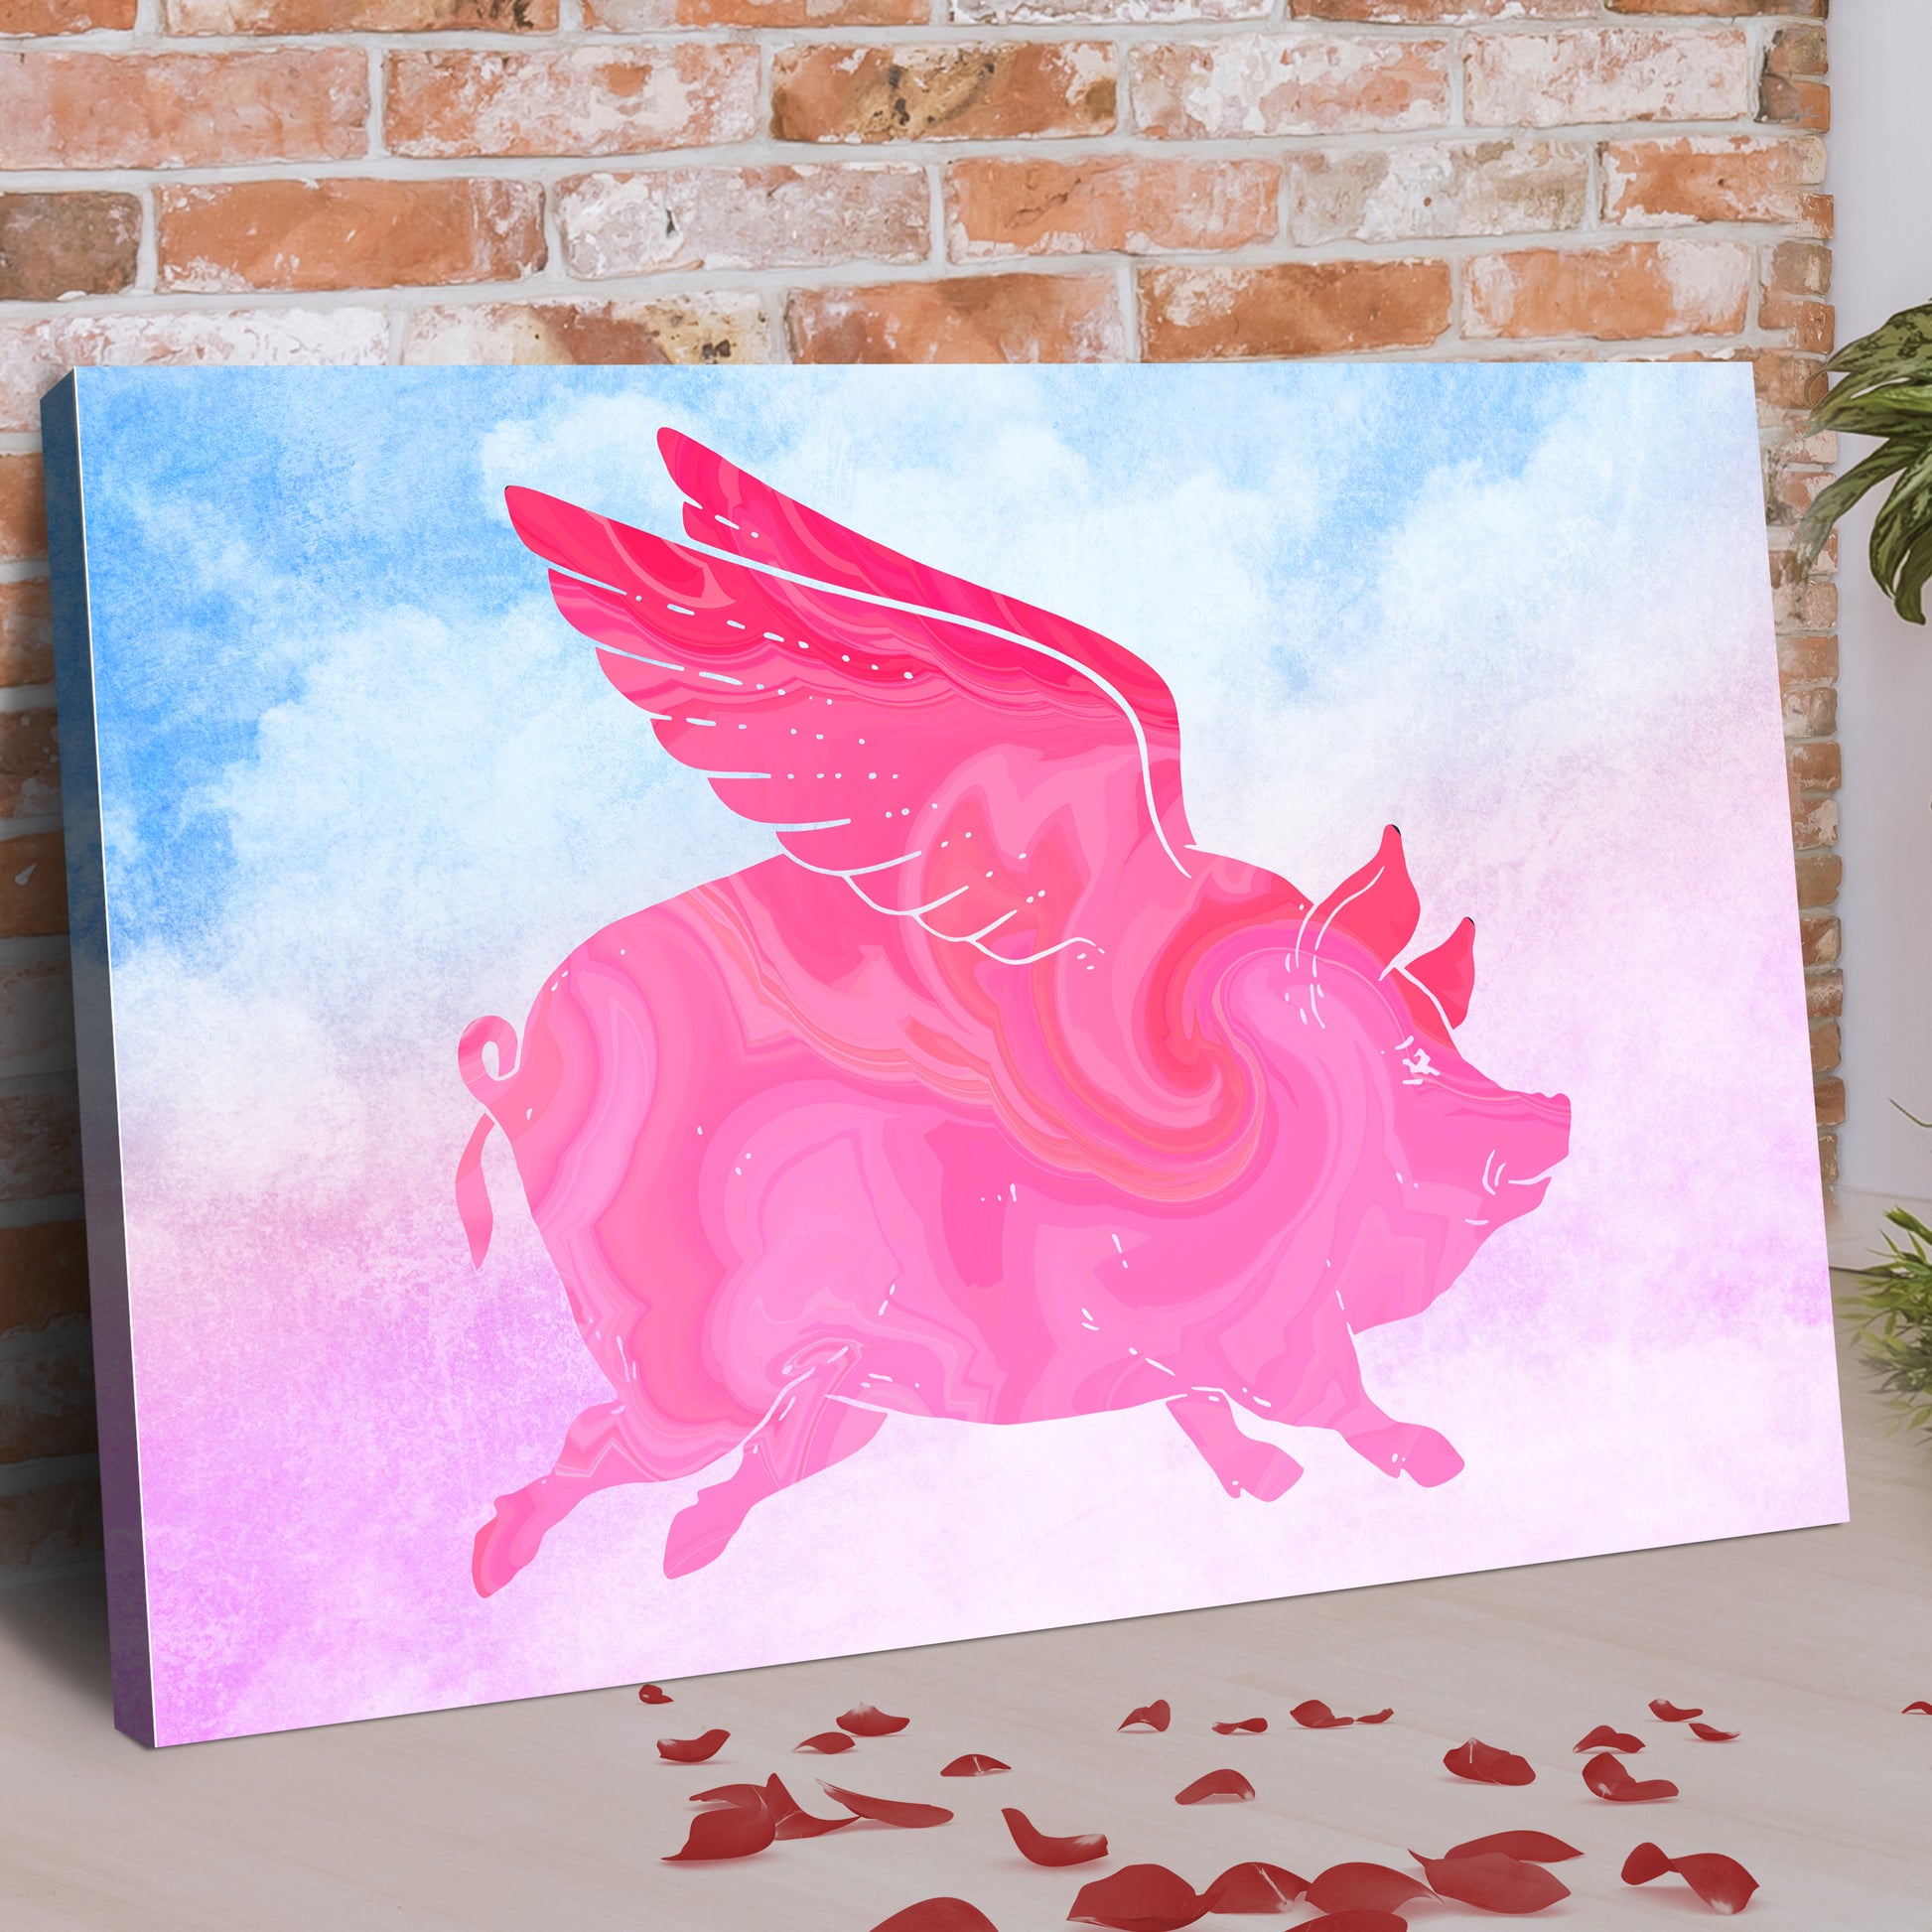 Flying Pig Artwork Canvas Wall Art Style 1 - Image by Tailored Canvases